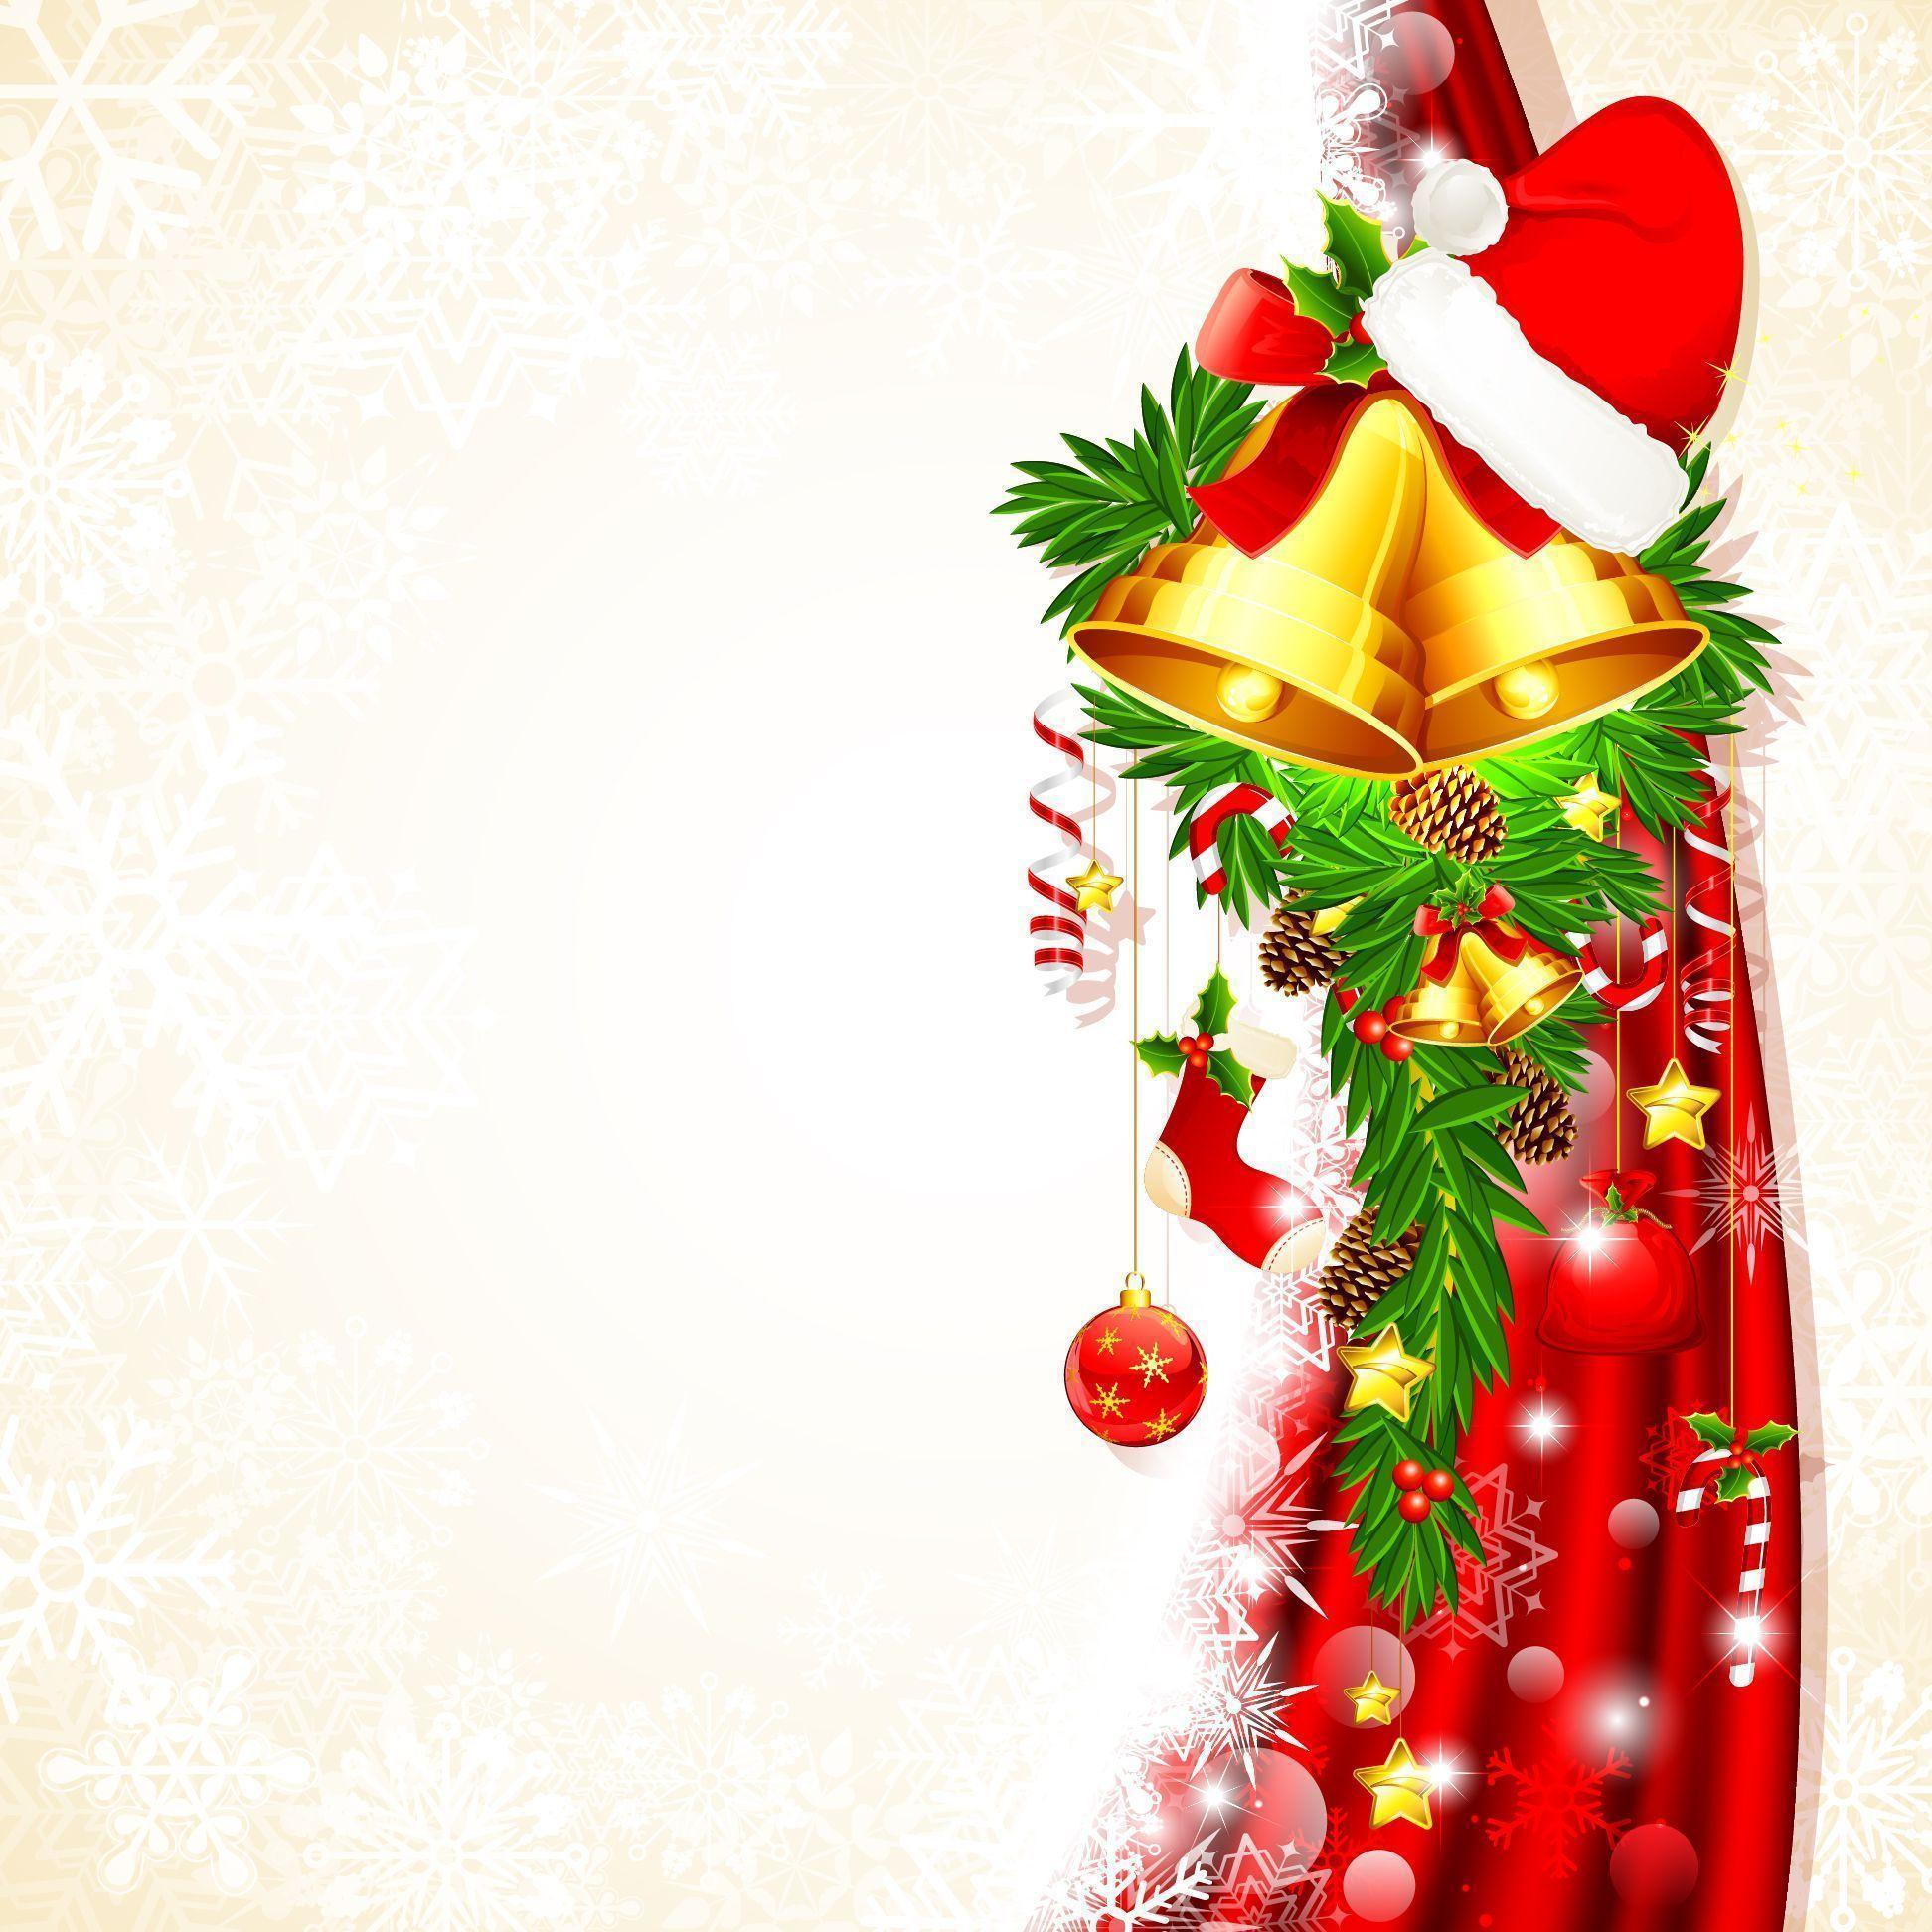 Christmas Background Images - Wallpaper Cave